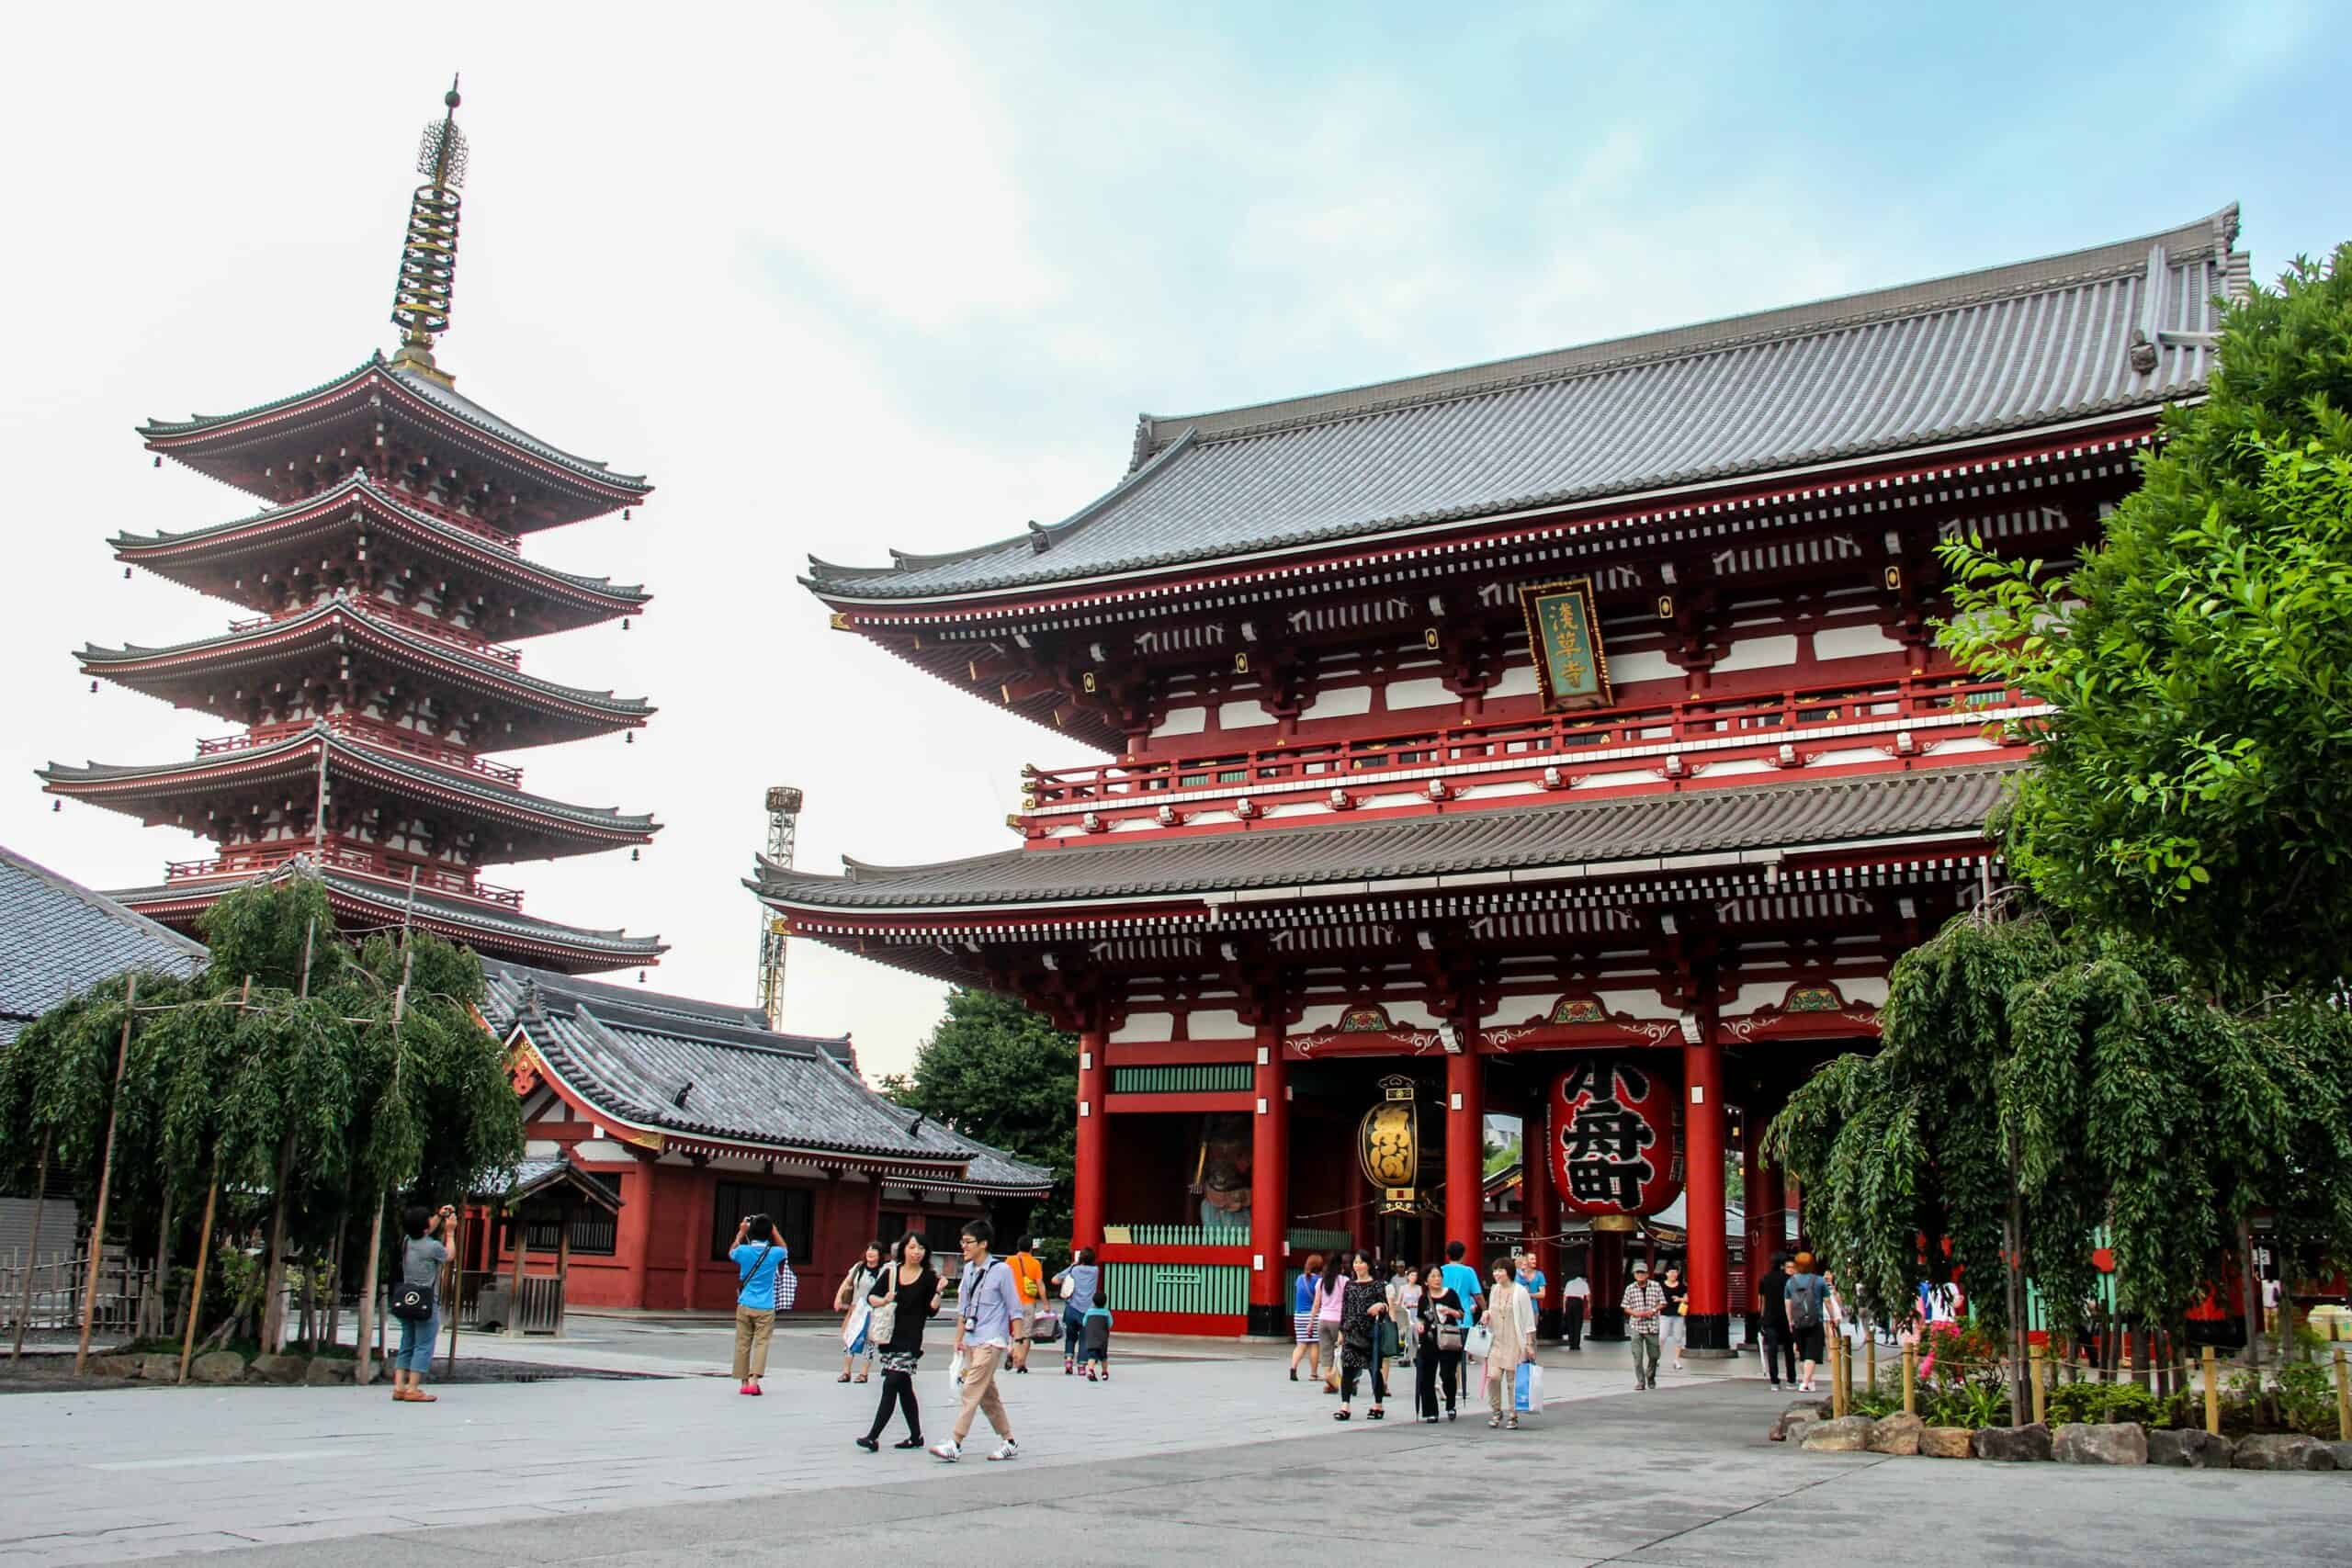 A Traditional red, multi-tiered Japanese temple in modern Tokyo.